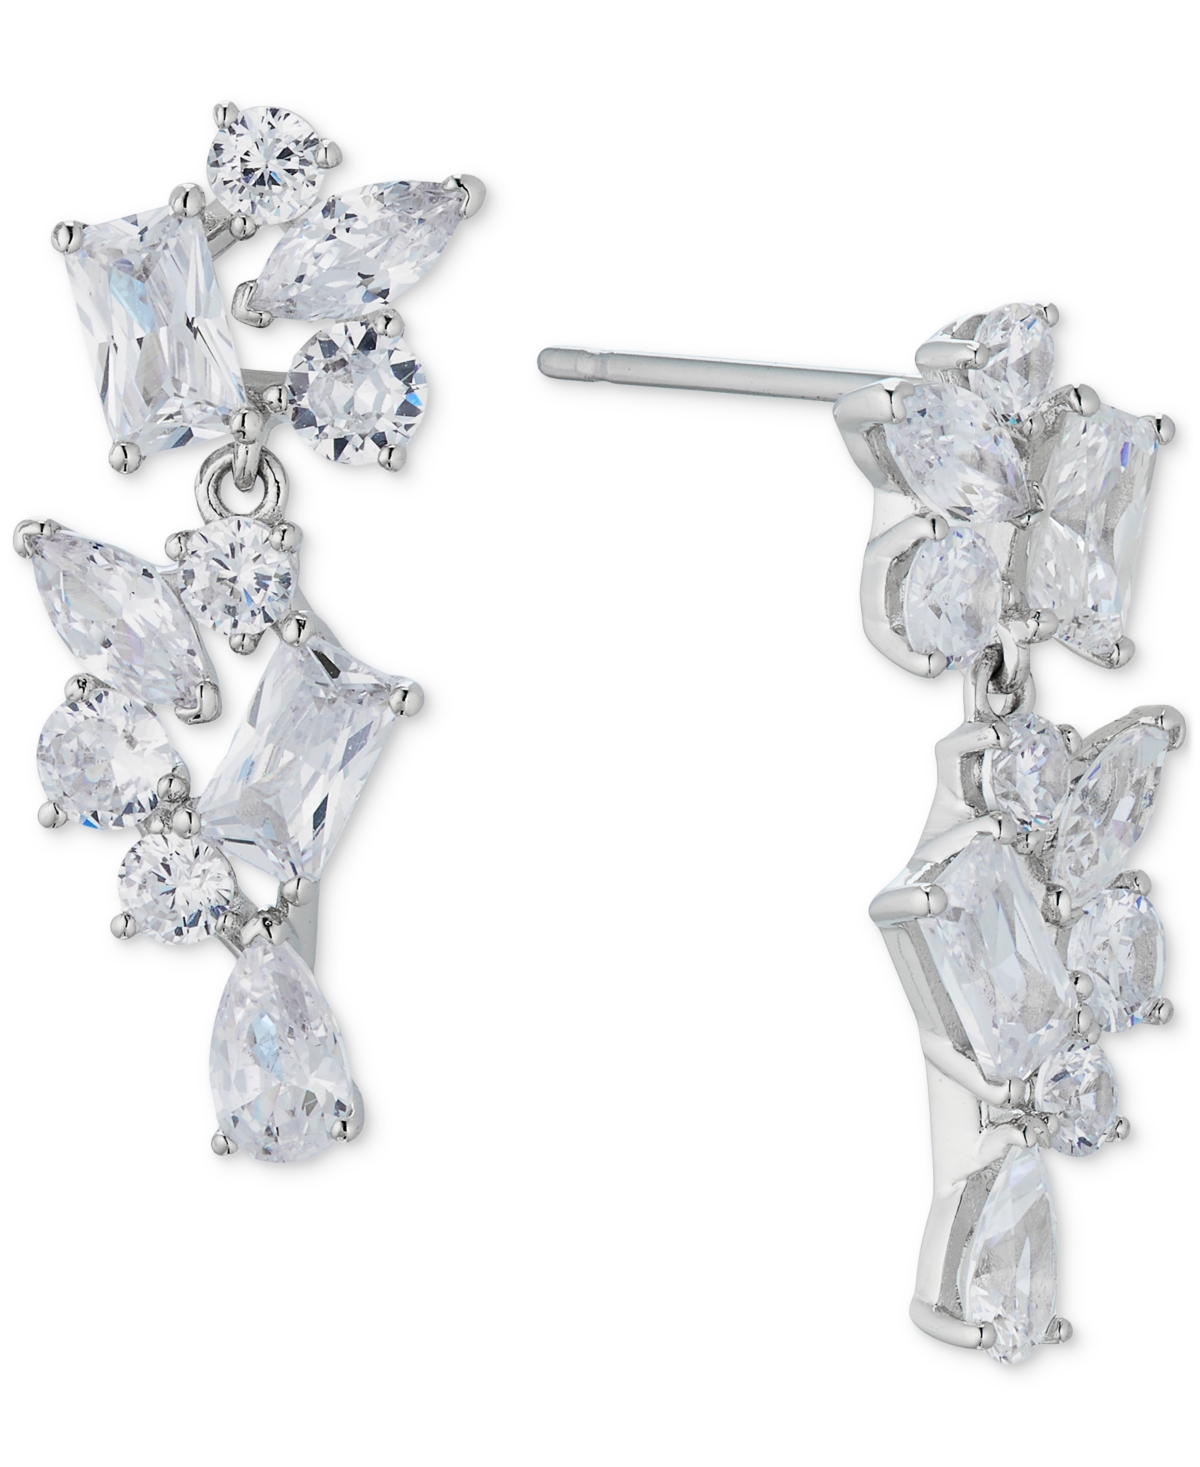 Silver-Tone Crystal Cluster Drop Earrings - Gold